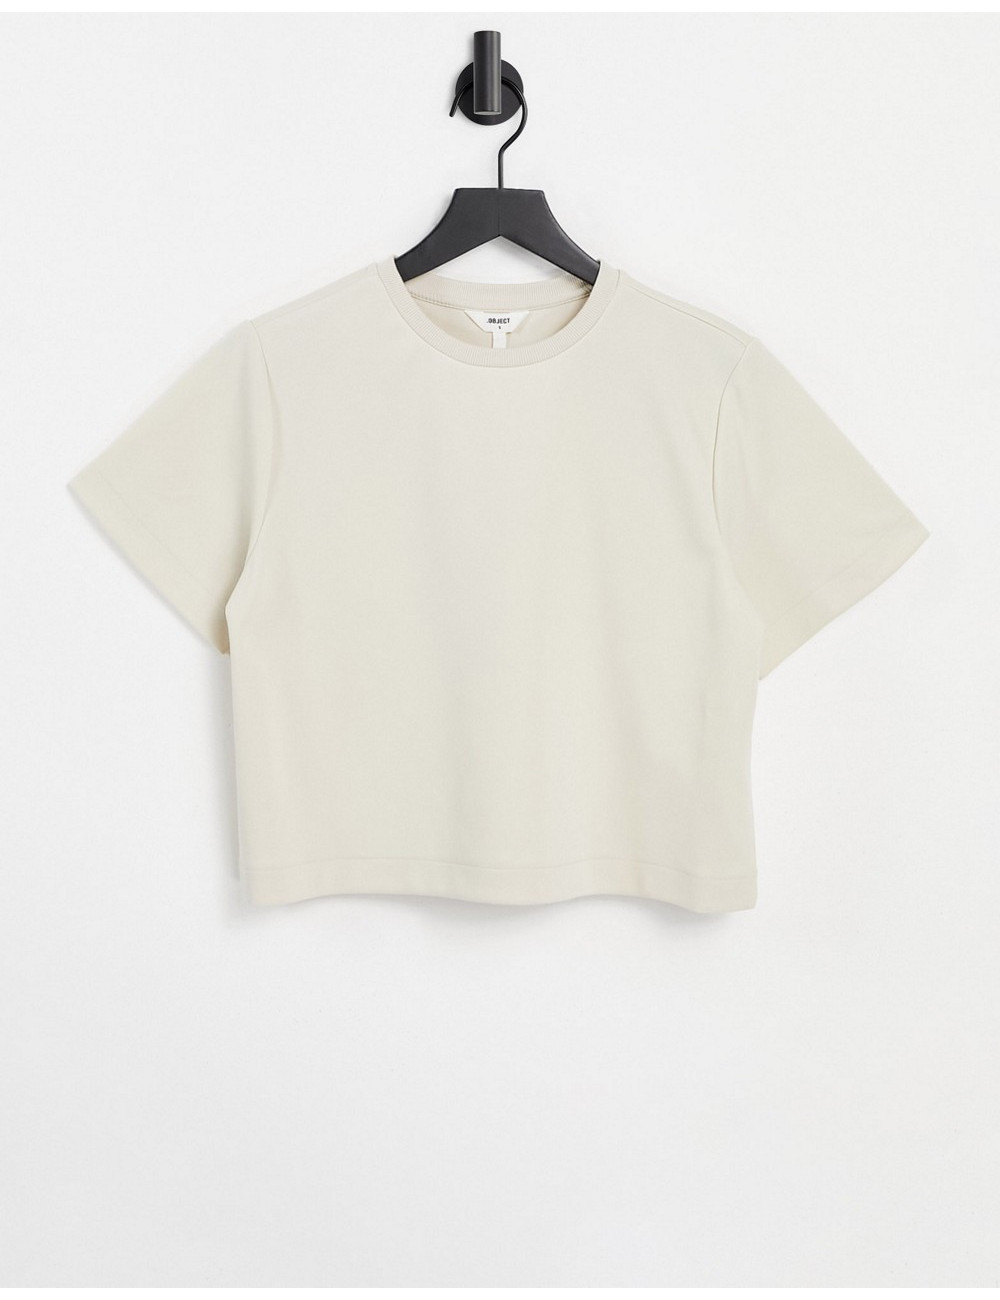 Object cropped t-shirt in...